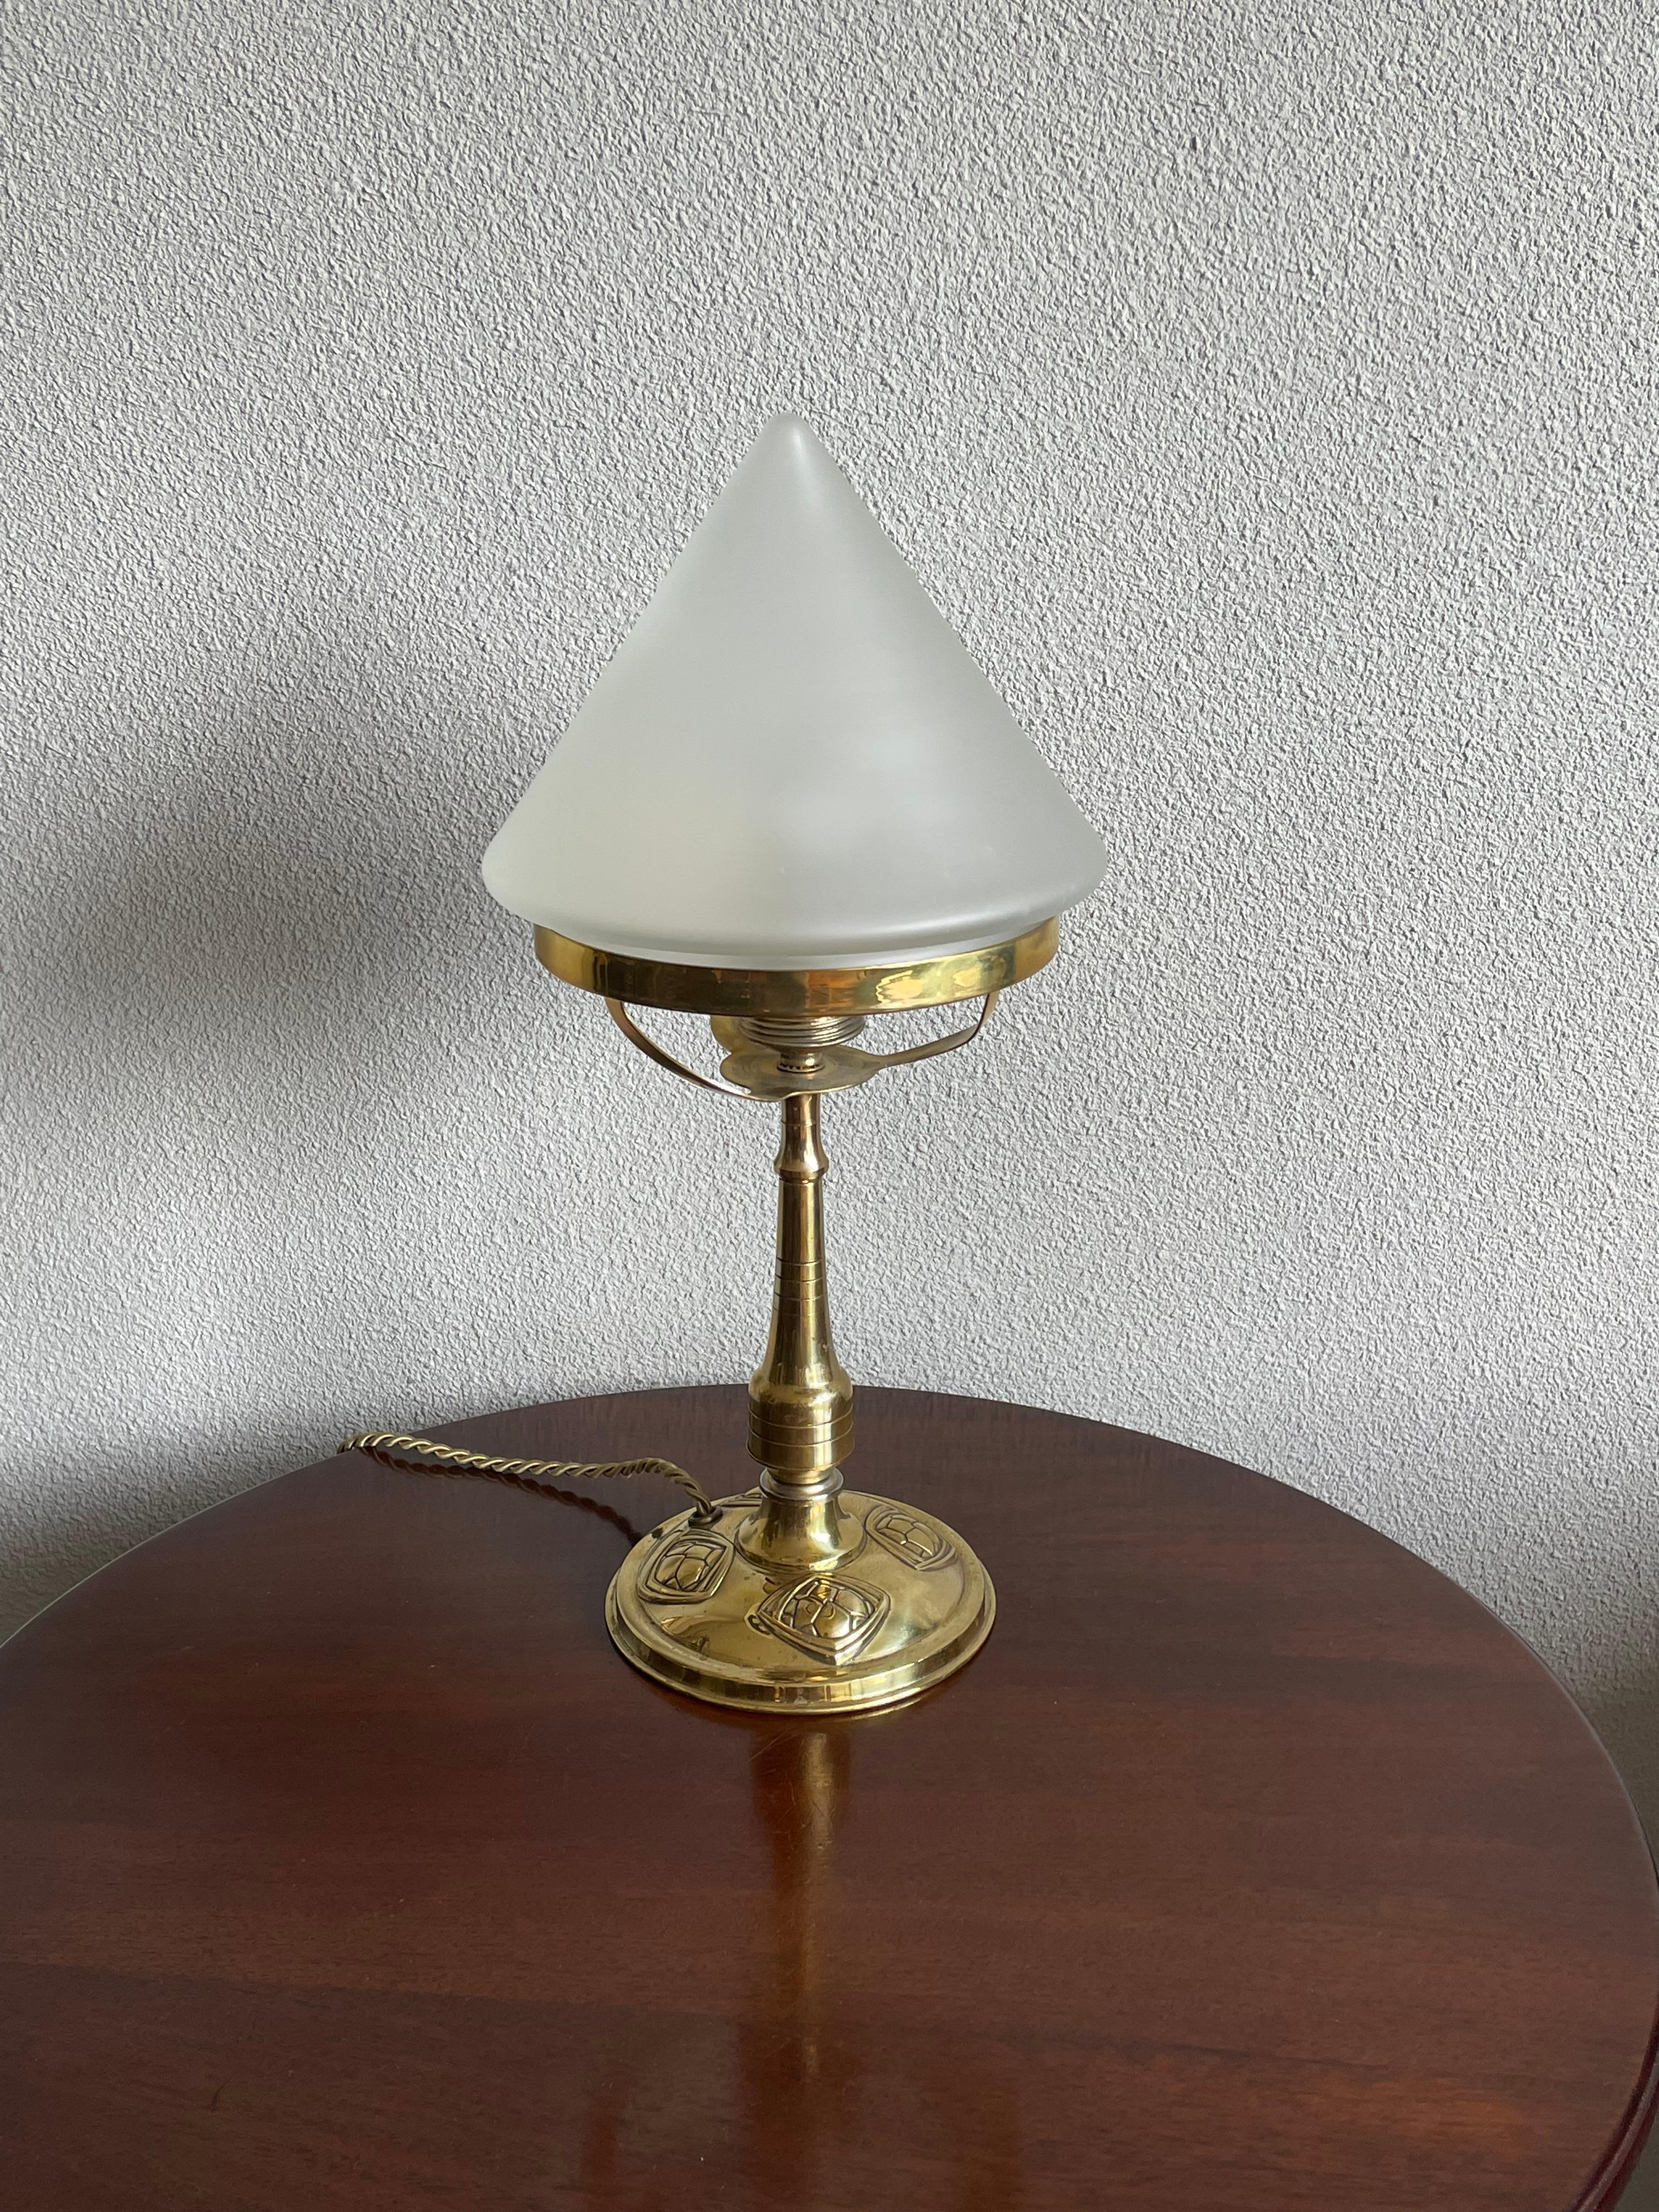 Unique Early 1900s Arts and Crafts, Fine Brass & Mint Glass Table or Desk Lamp For Sale 8